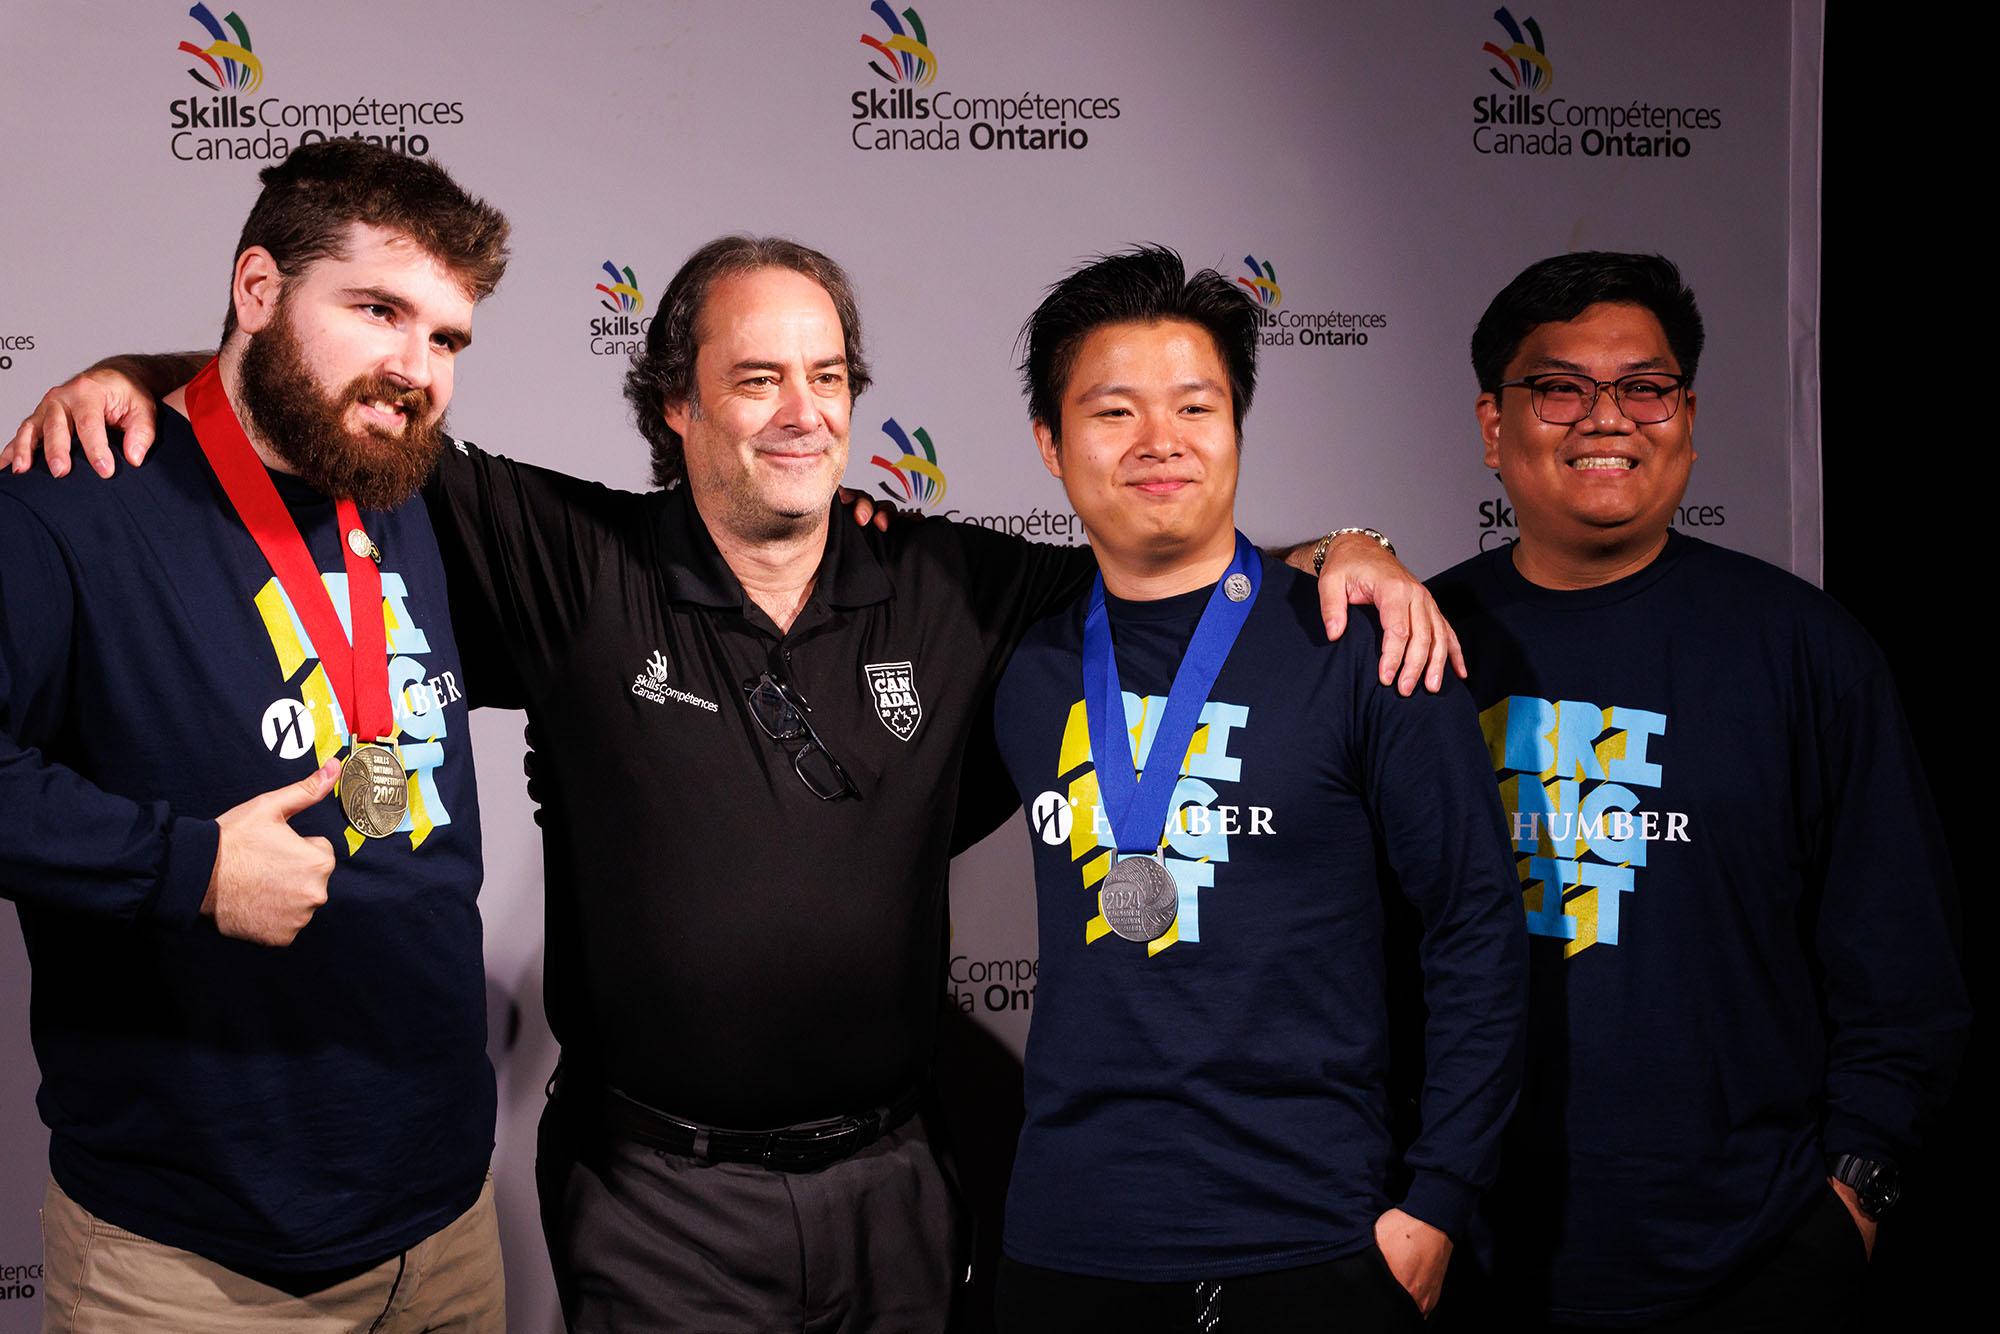 Four people stand together. Three a wearing Humber shirts. Two have medals around their necks.